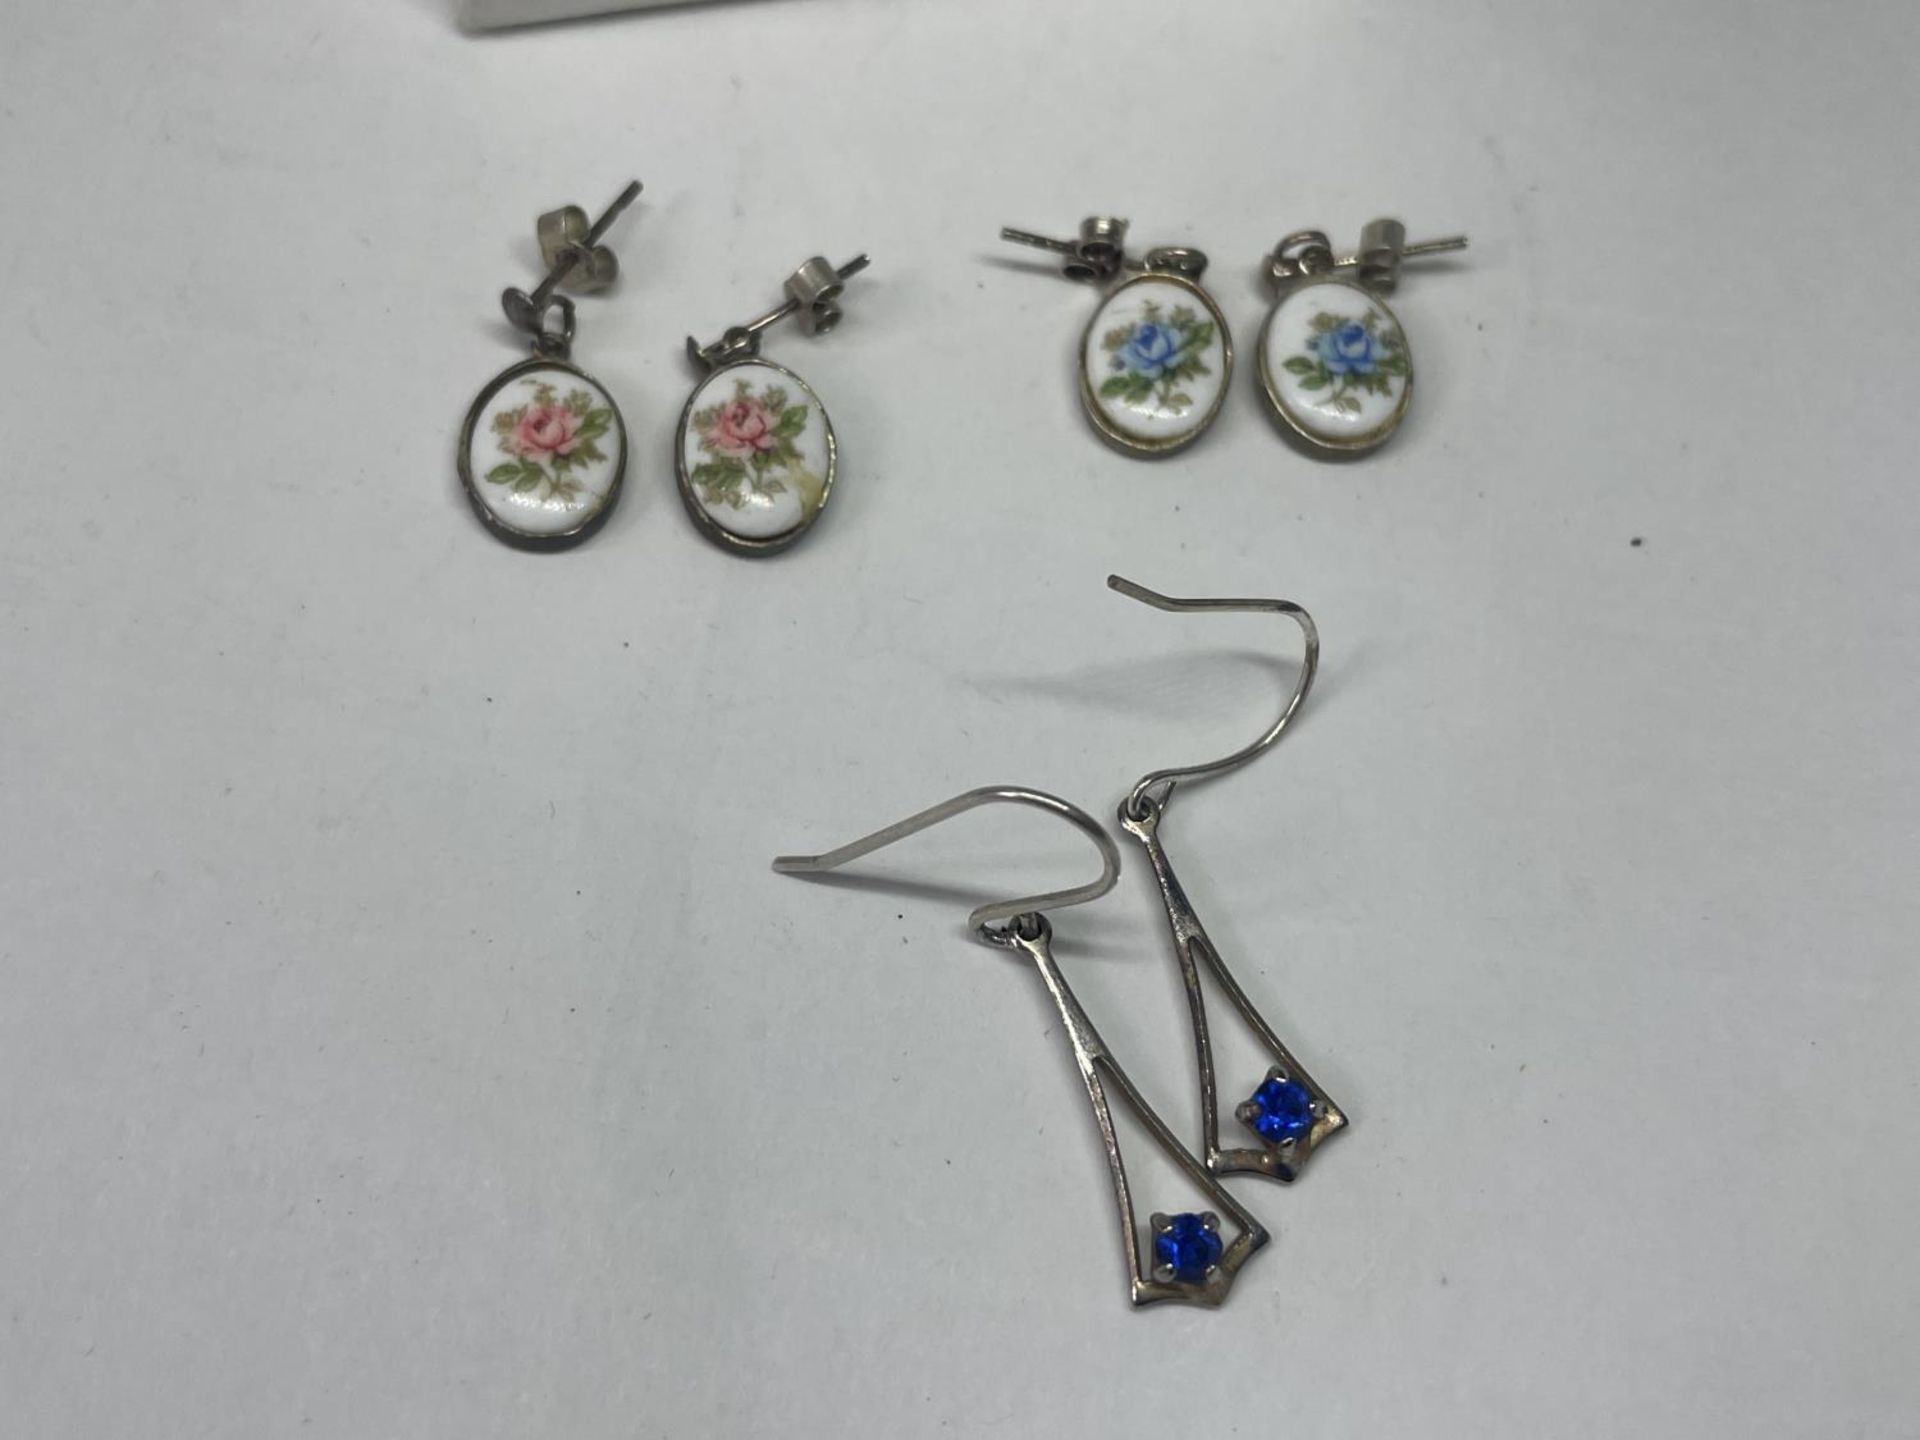 FOUR PAIRS OF SILVER EARRINGS - Image 3 of 3